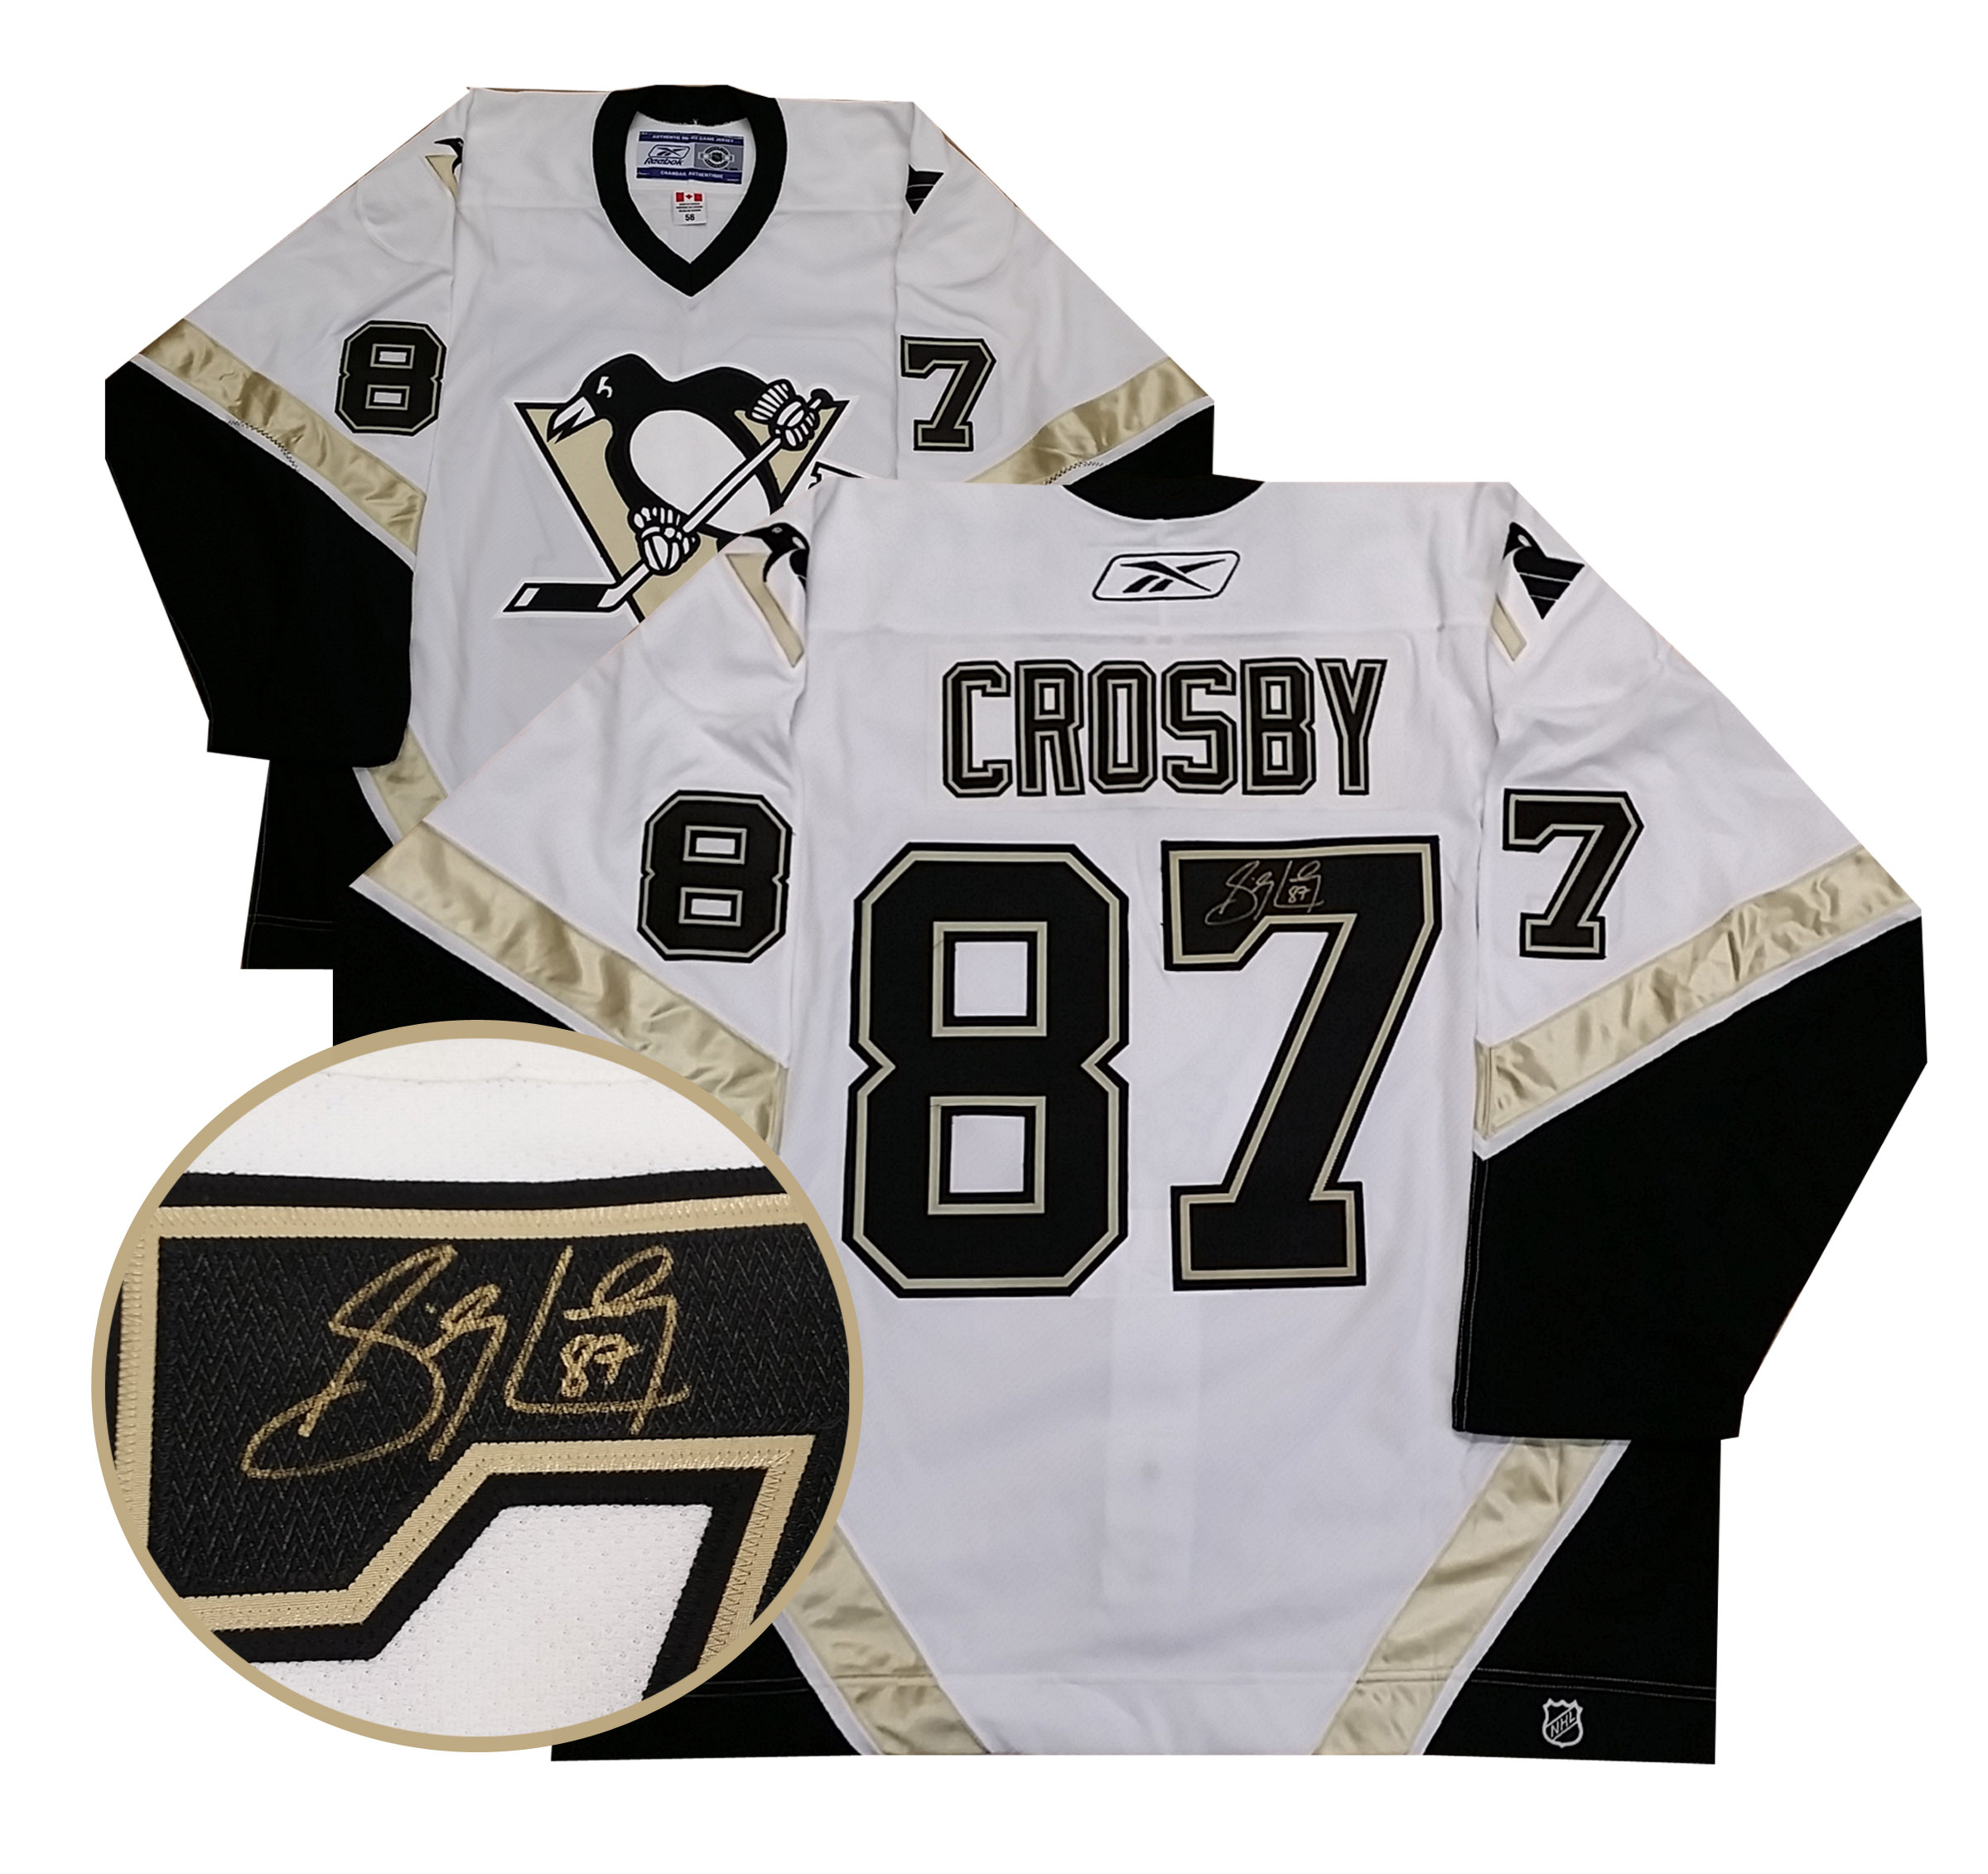 sidney crosby autographed pittsburgh penguins jersey